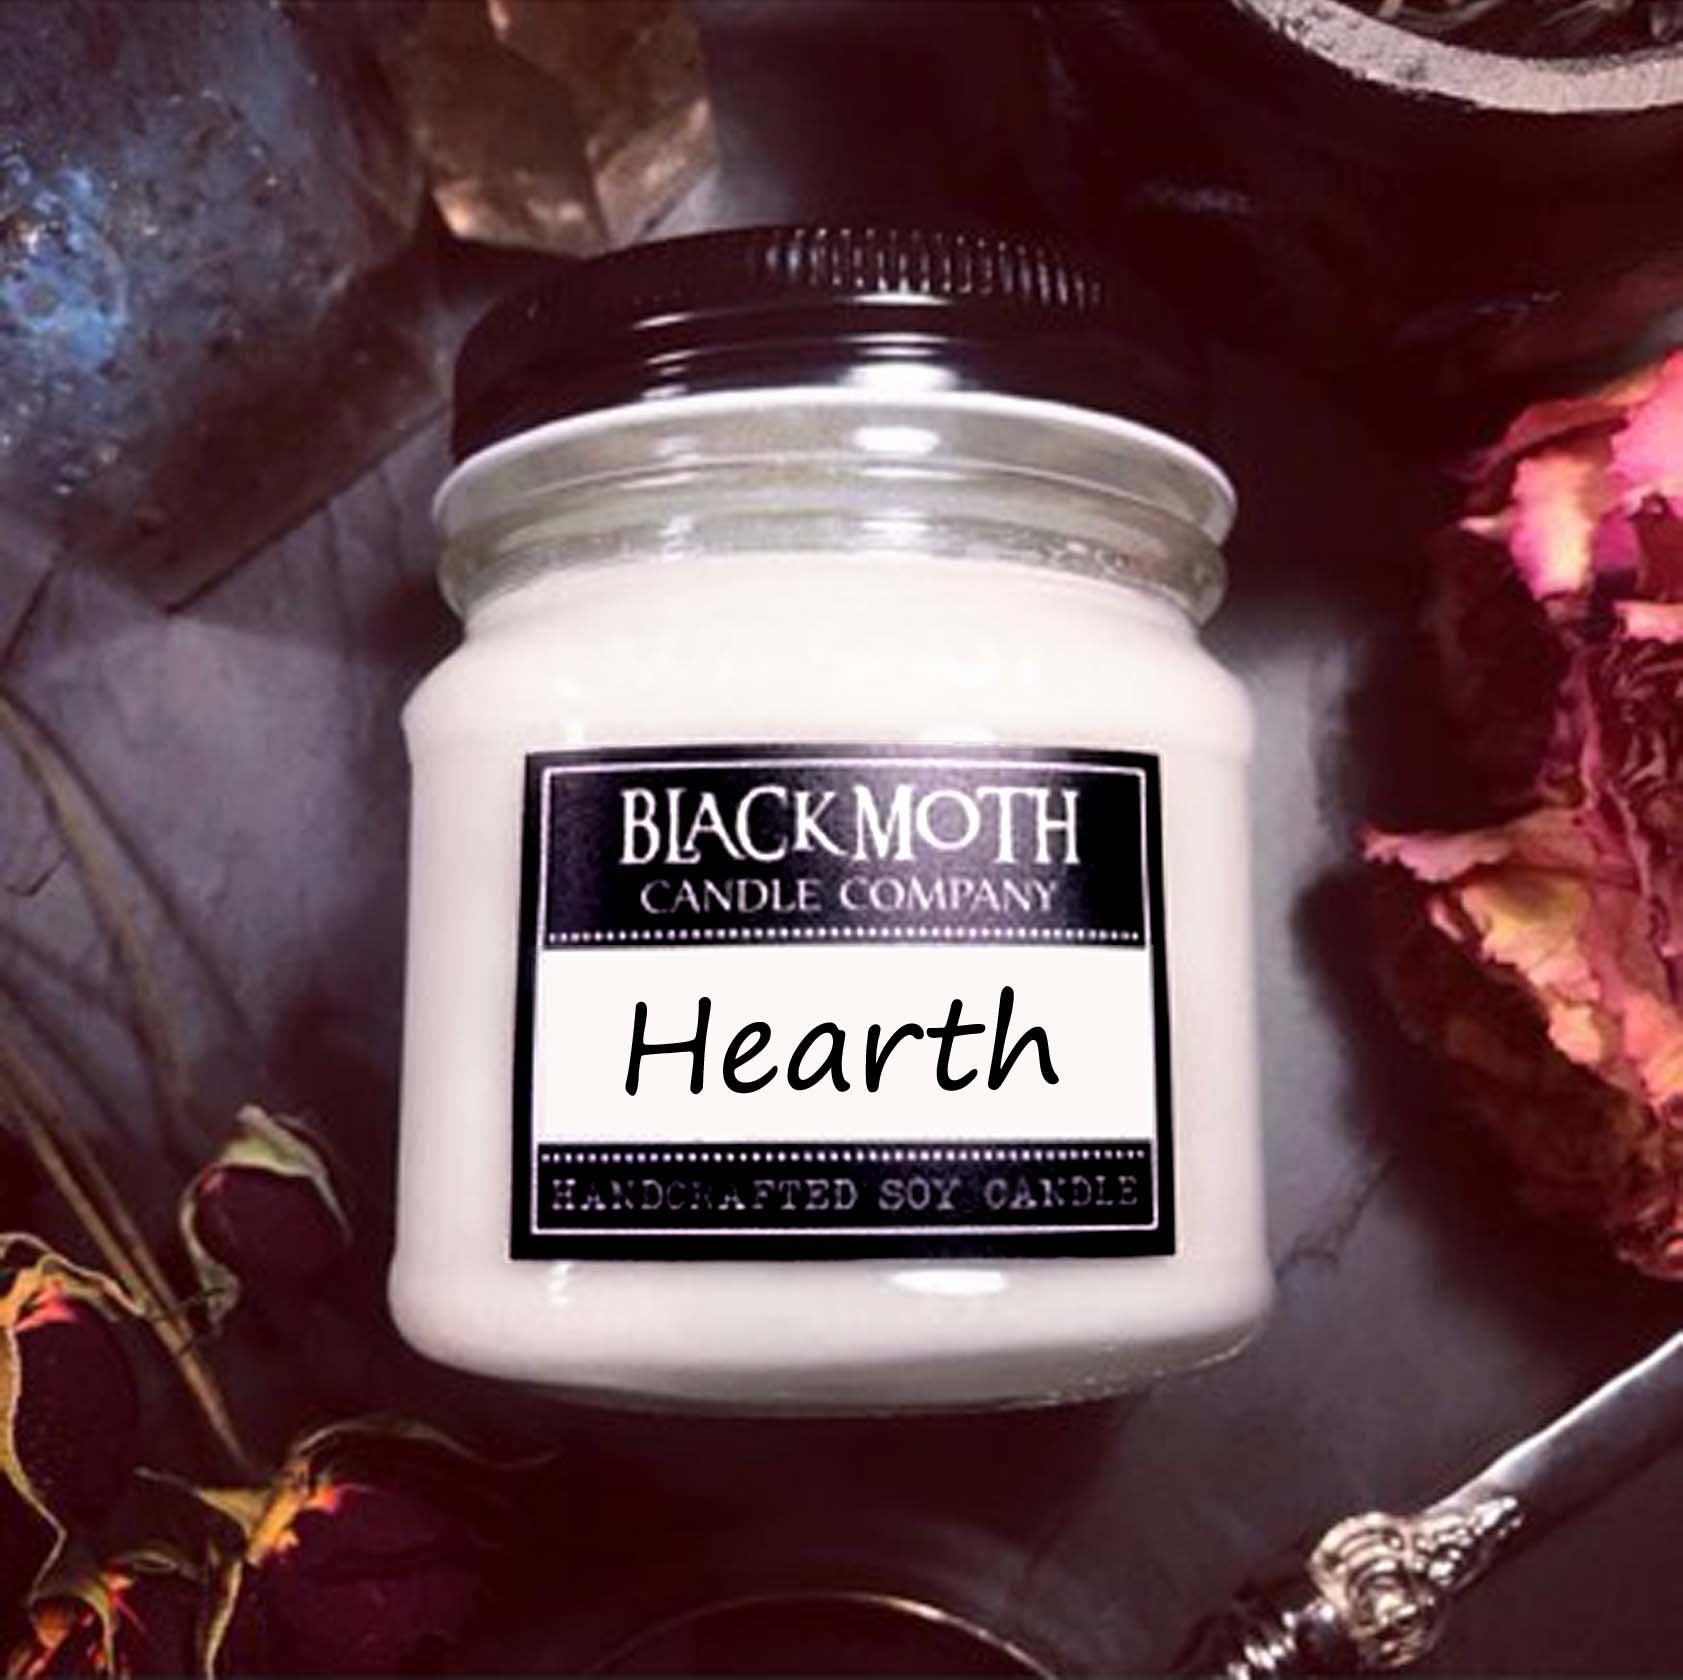 8 oz Hearth Scented Soy Candle in Mason Jar